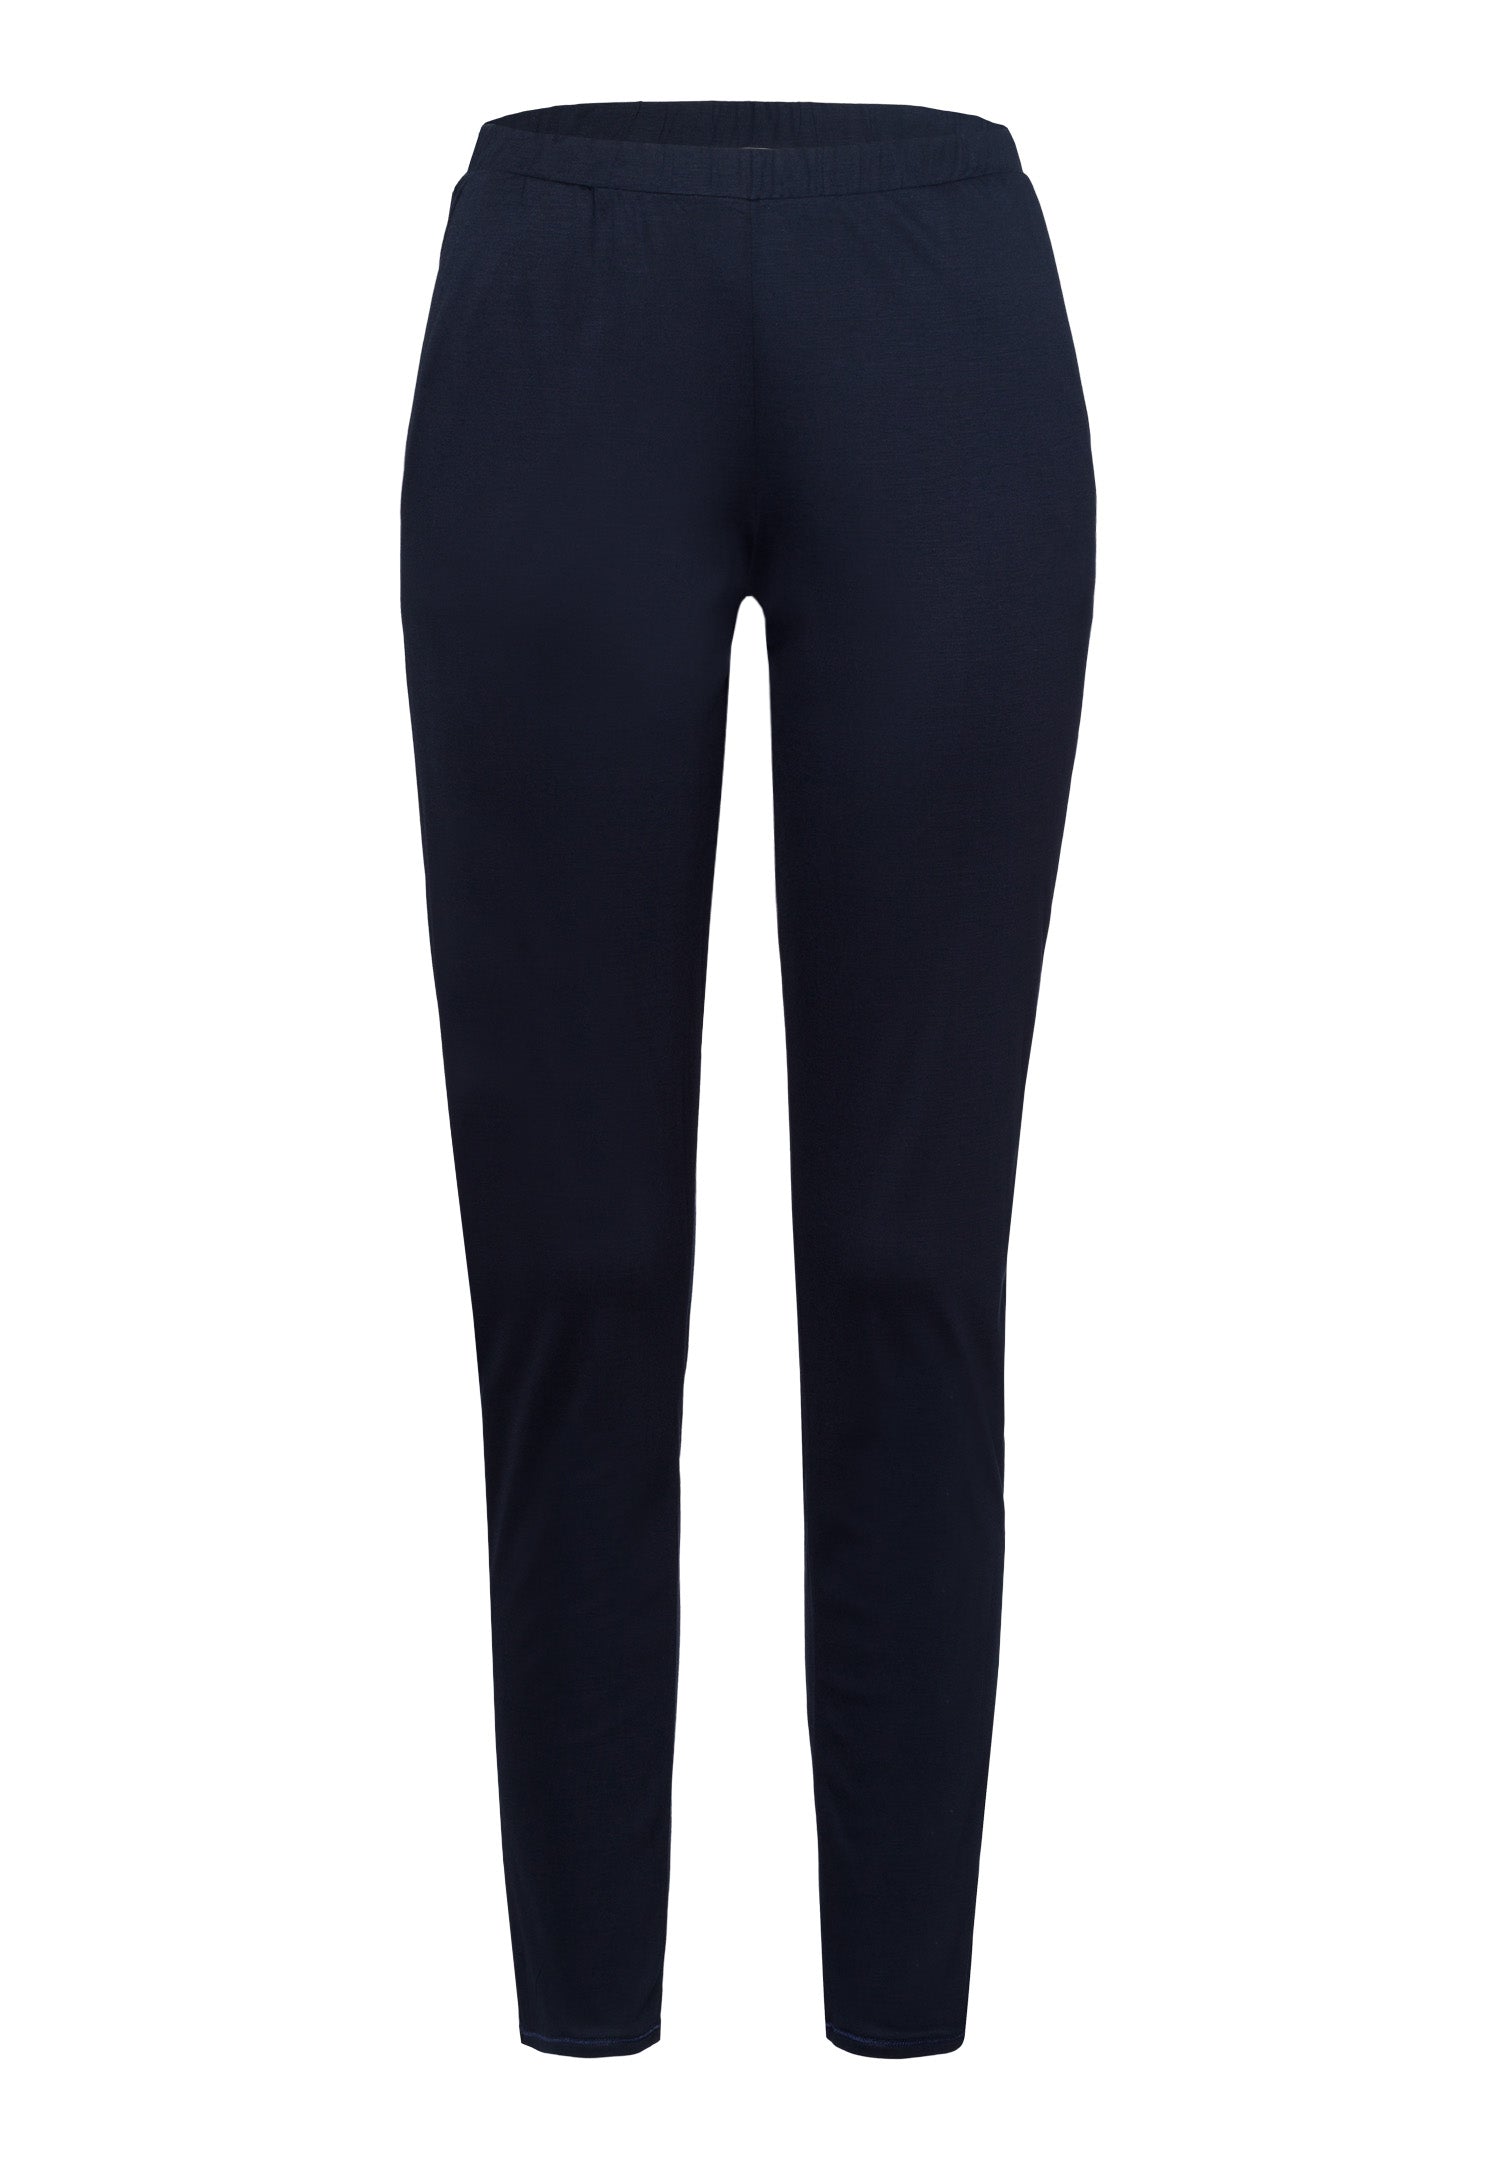 77409 Grand Central Knit Pant - 1610 Deep Navy